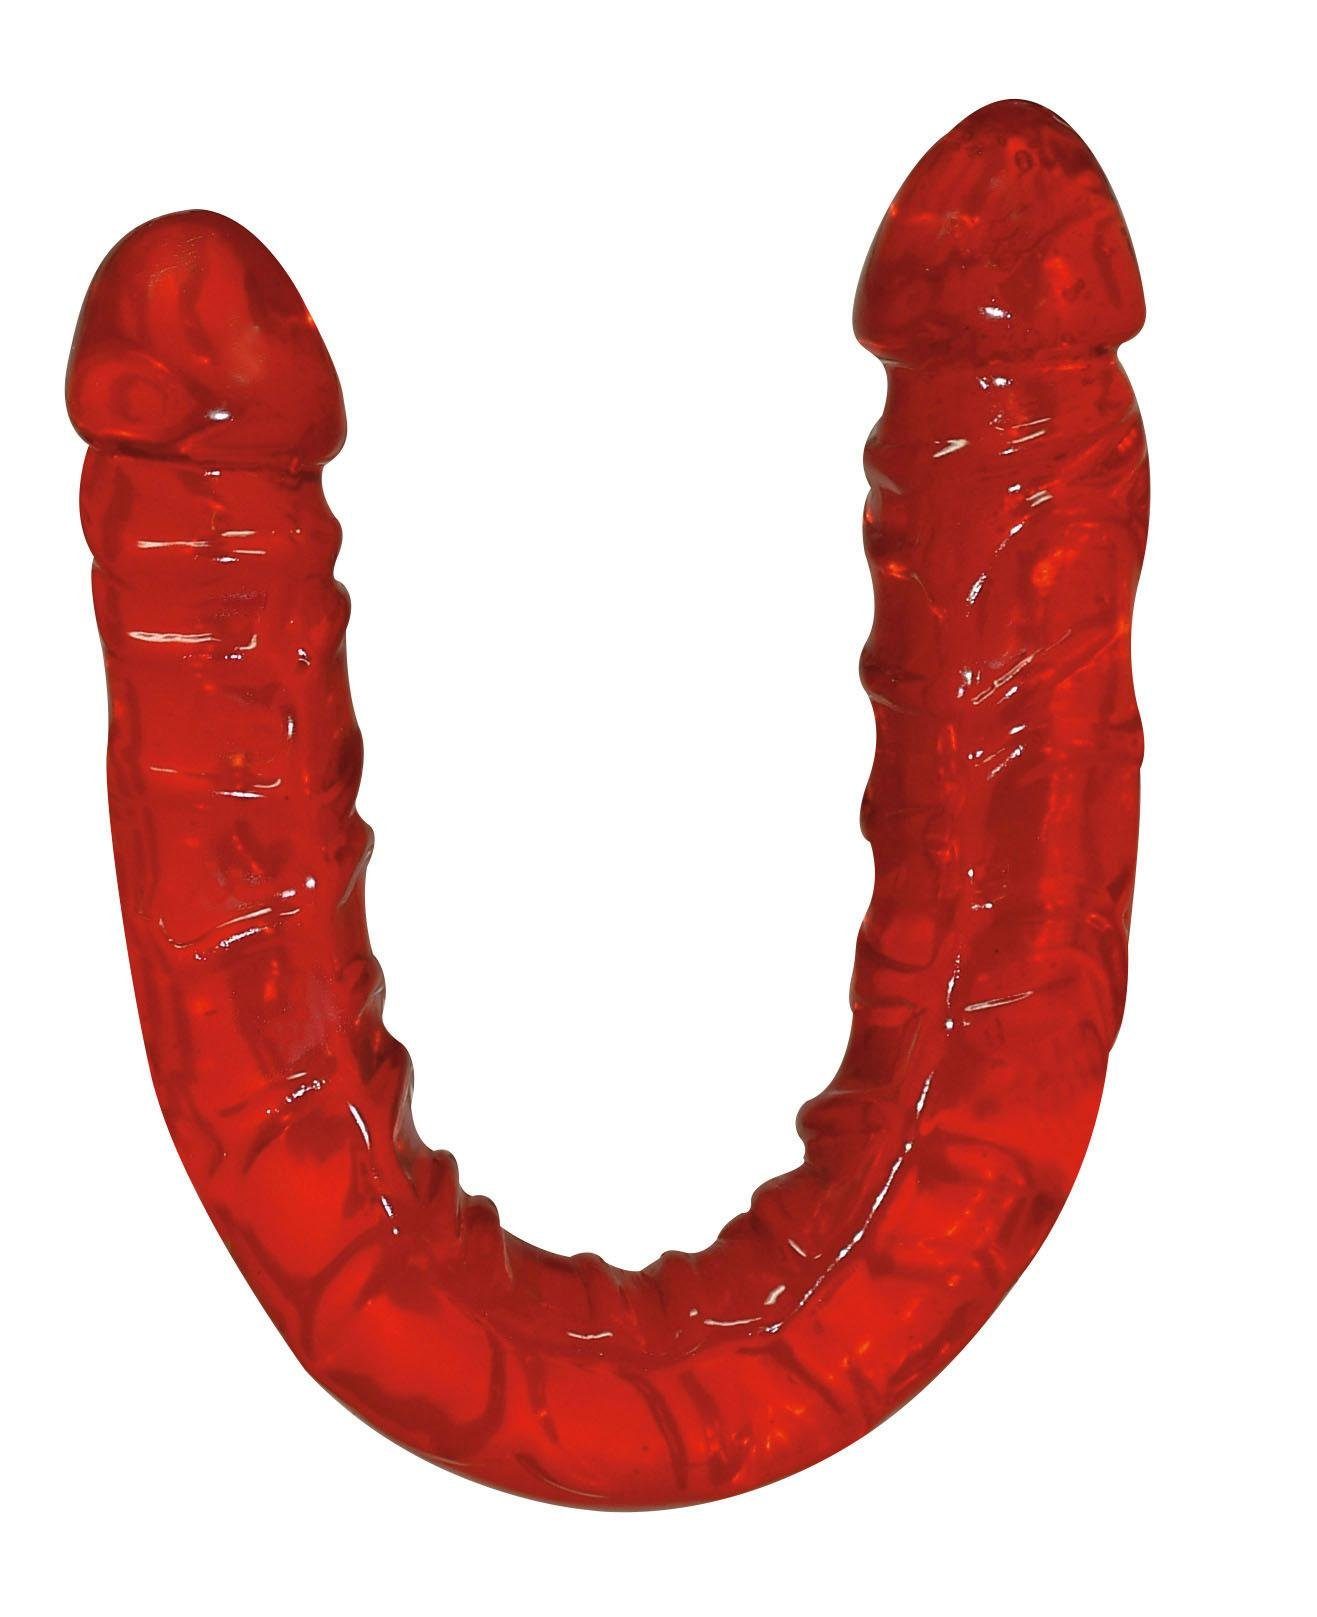 Otto - You2toys NU 15% KORTING: You2Toys dubbele dildo Ultra-Dong rood, rode buigzame dildo in penismodel met twee uiteinden